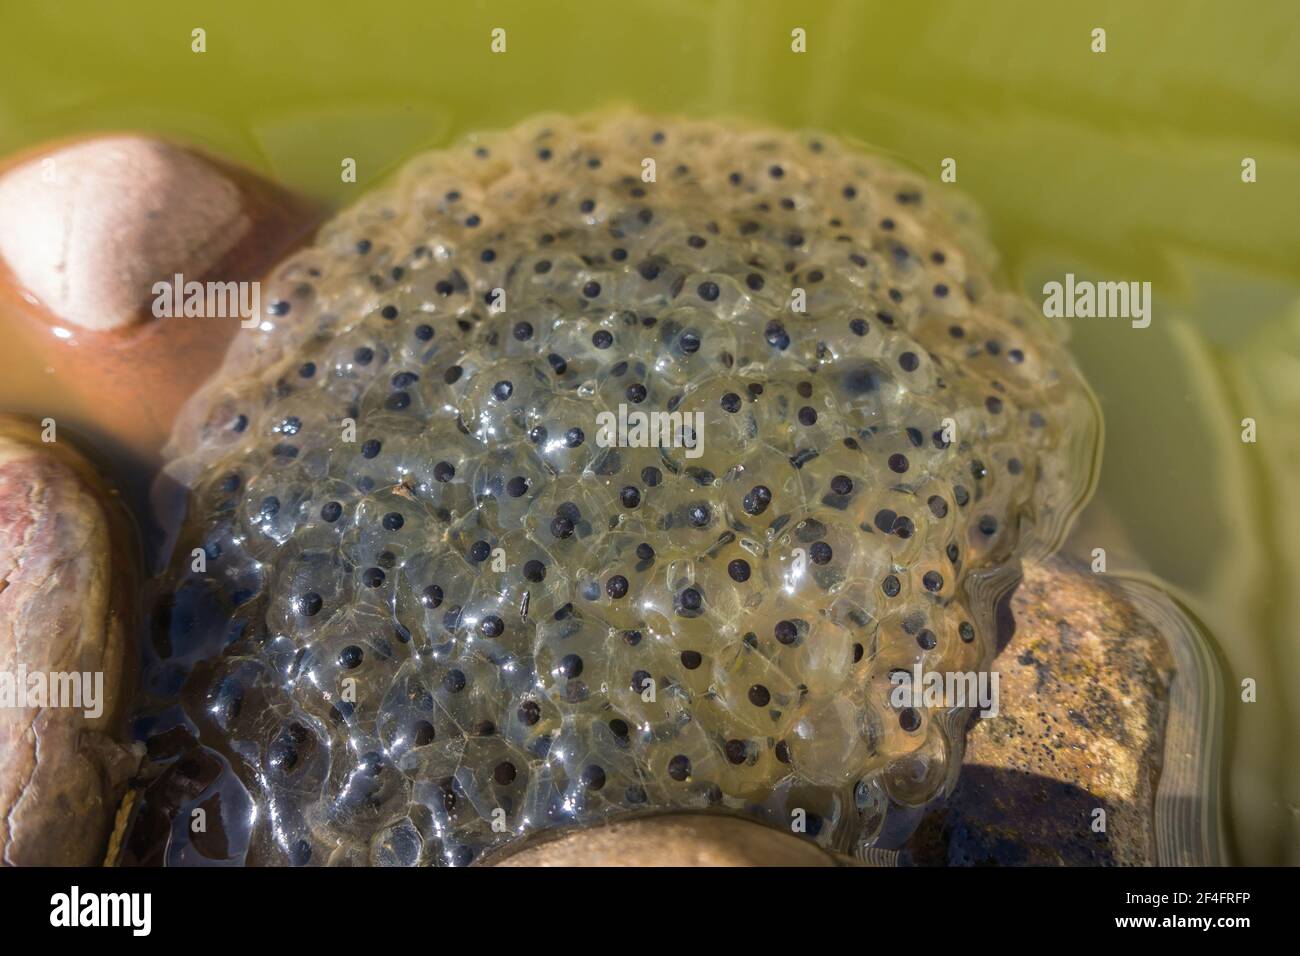 Common frog spawn at the edge of garden pond, Hereford UK. March 2021 Stock Photo